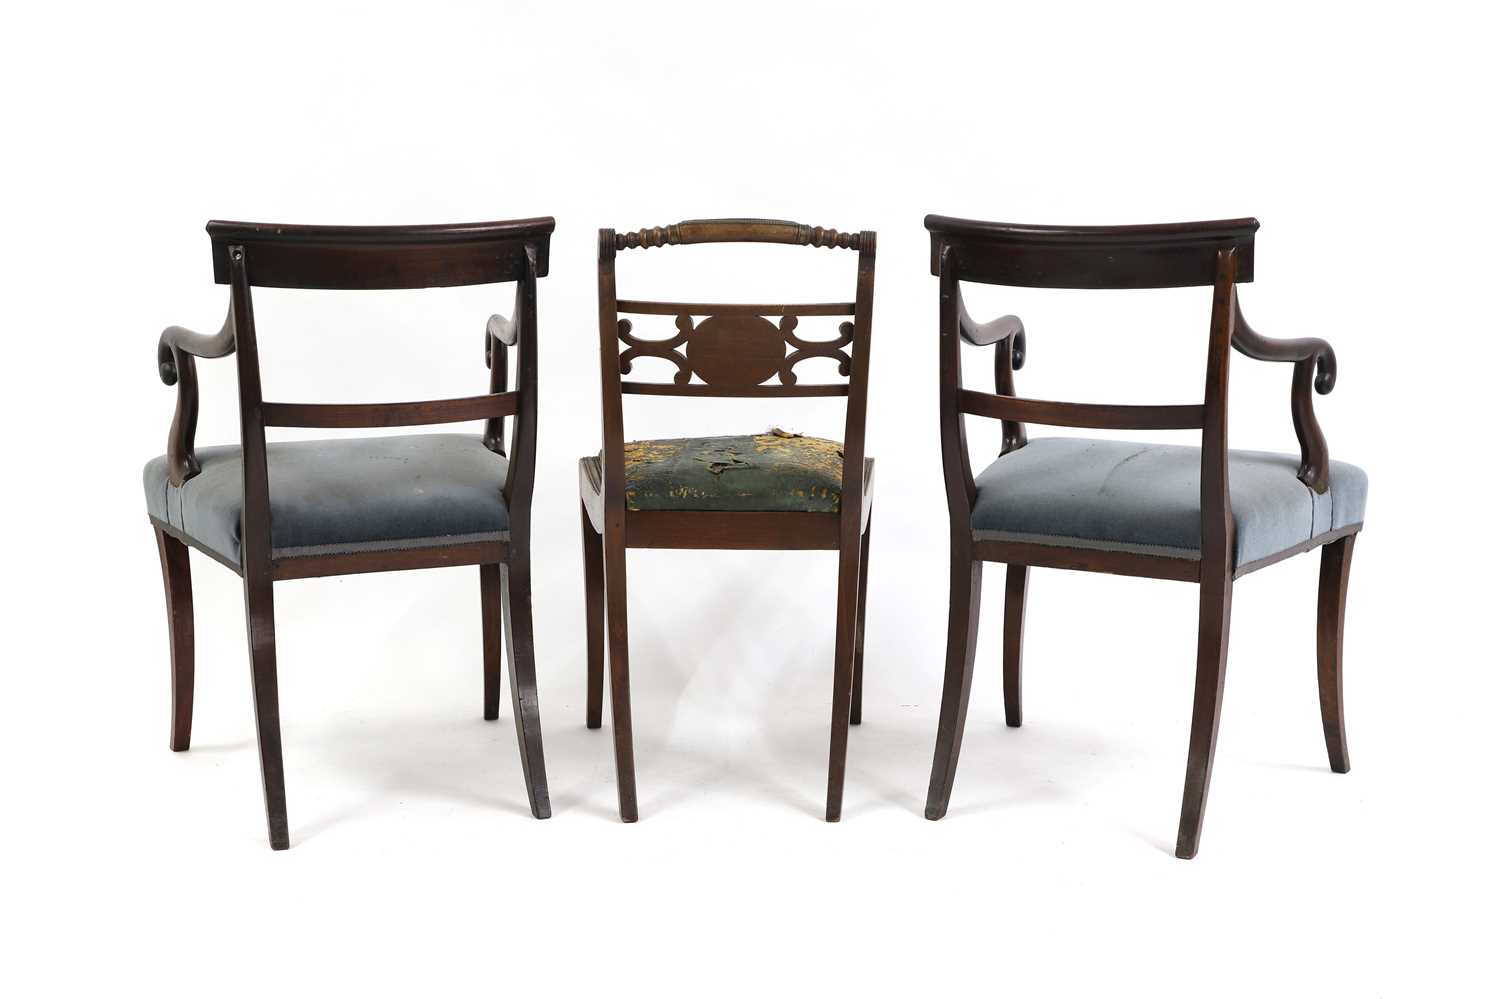 A pair of Regency mahogany chairs, - Image 3 of 3